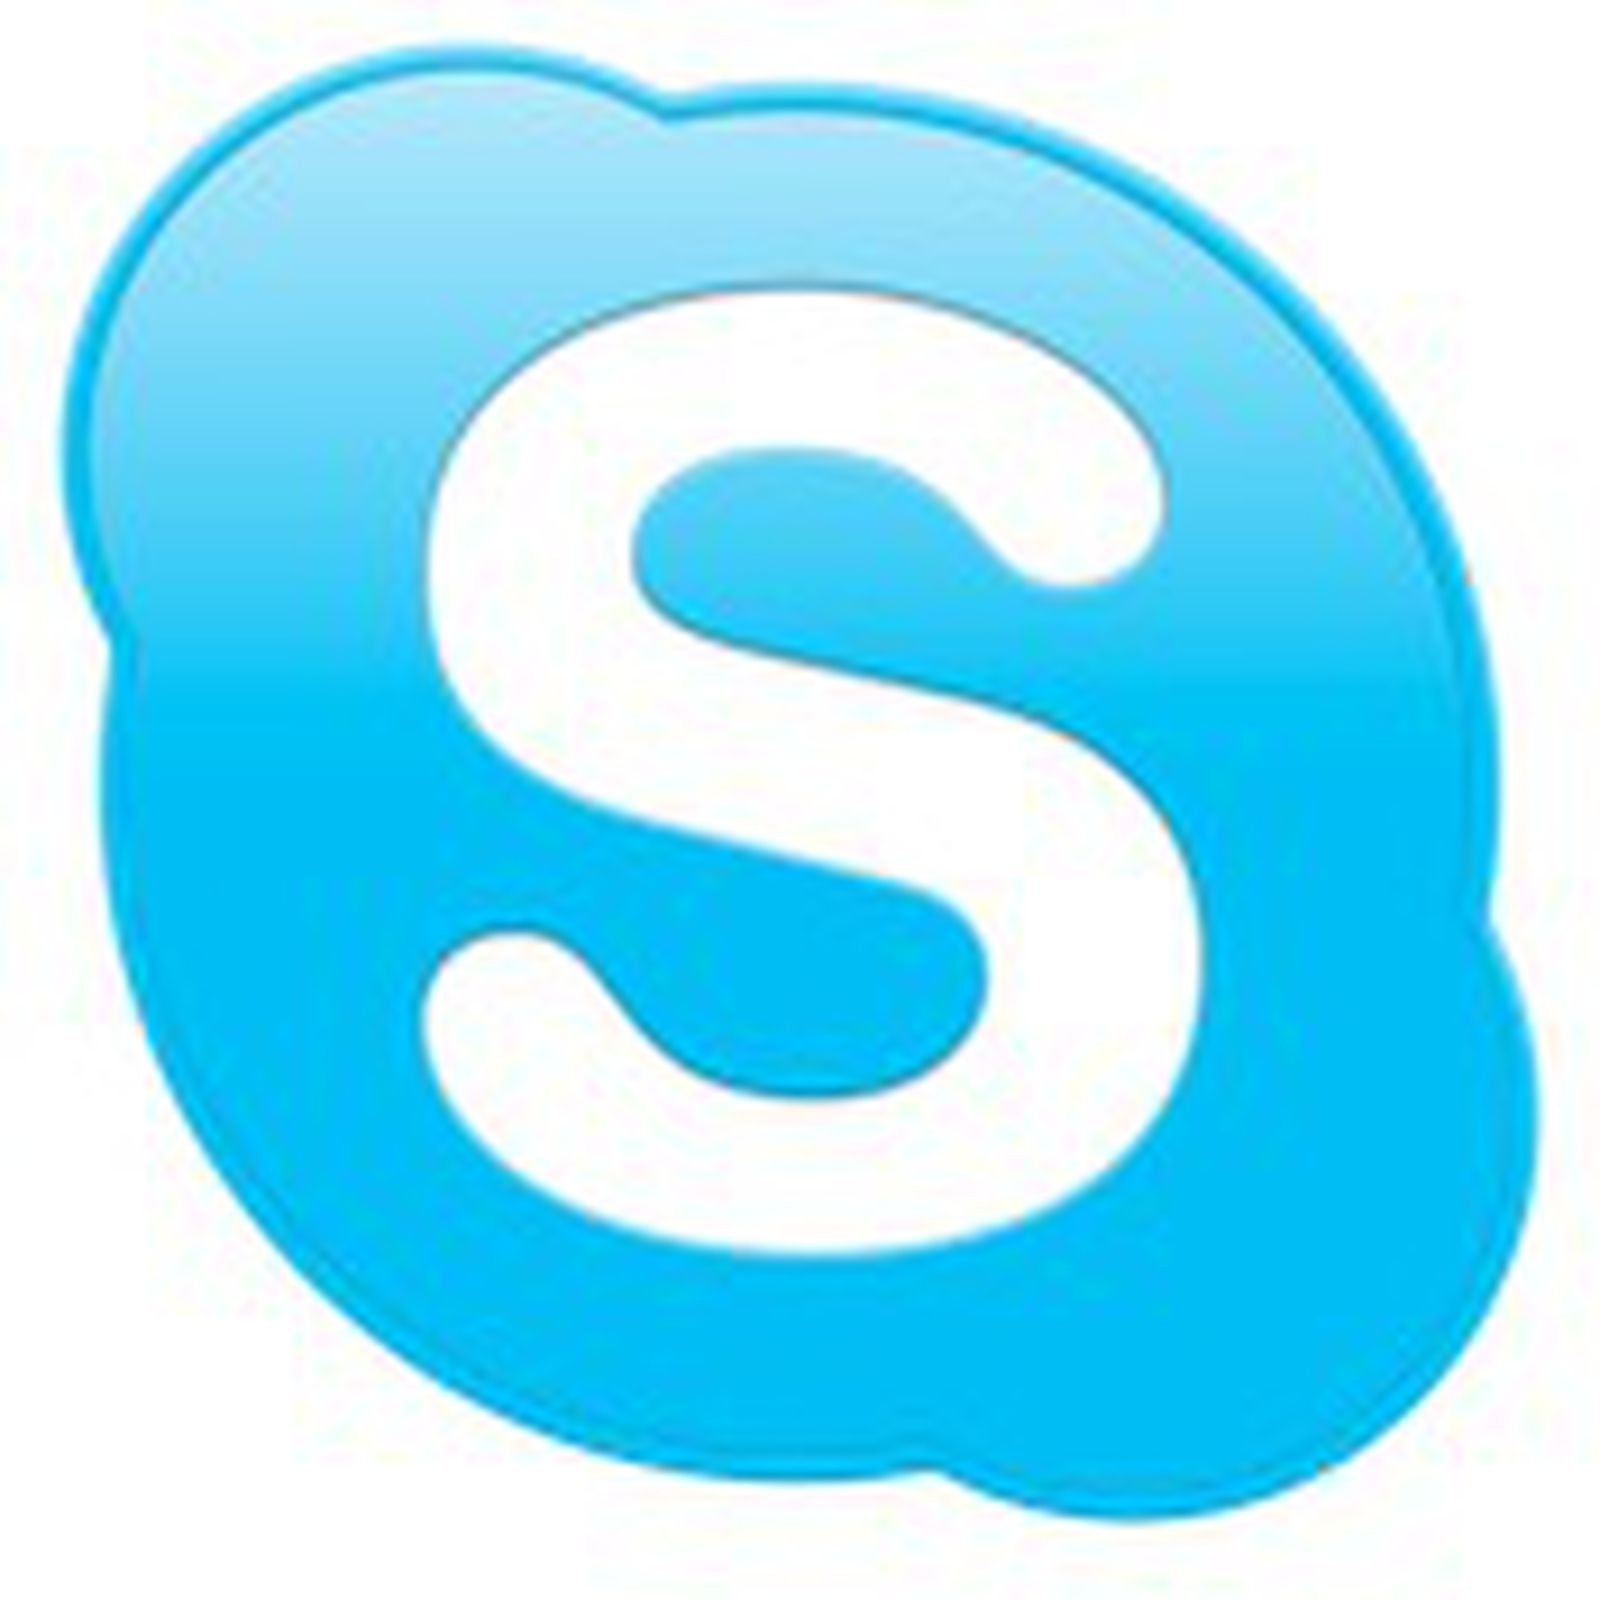 download the new version for ipod Skype 8.99.0.403